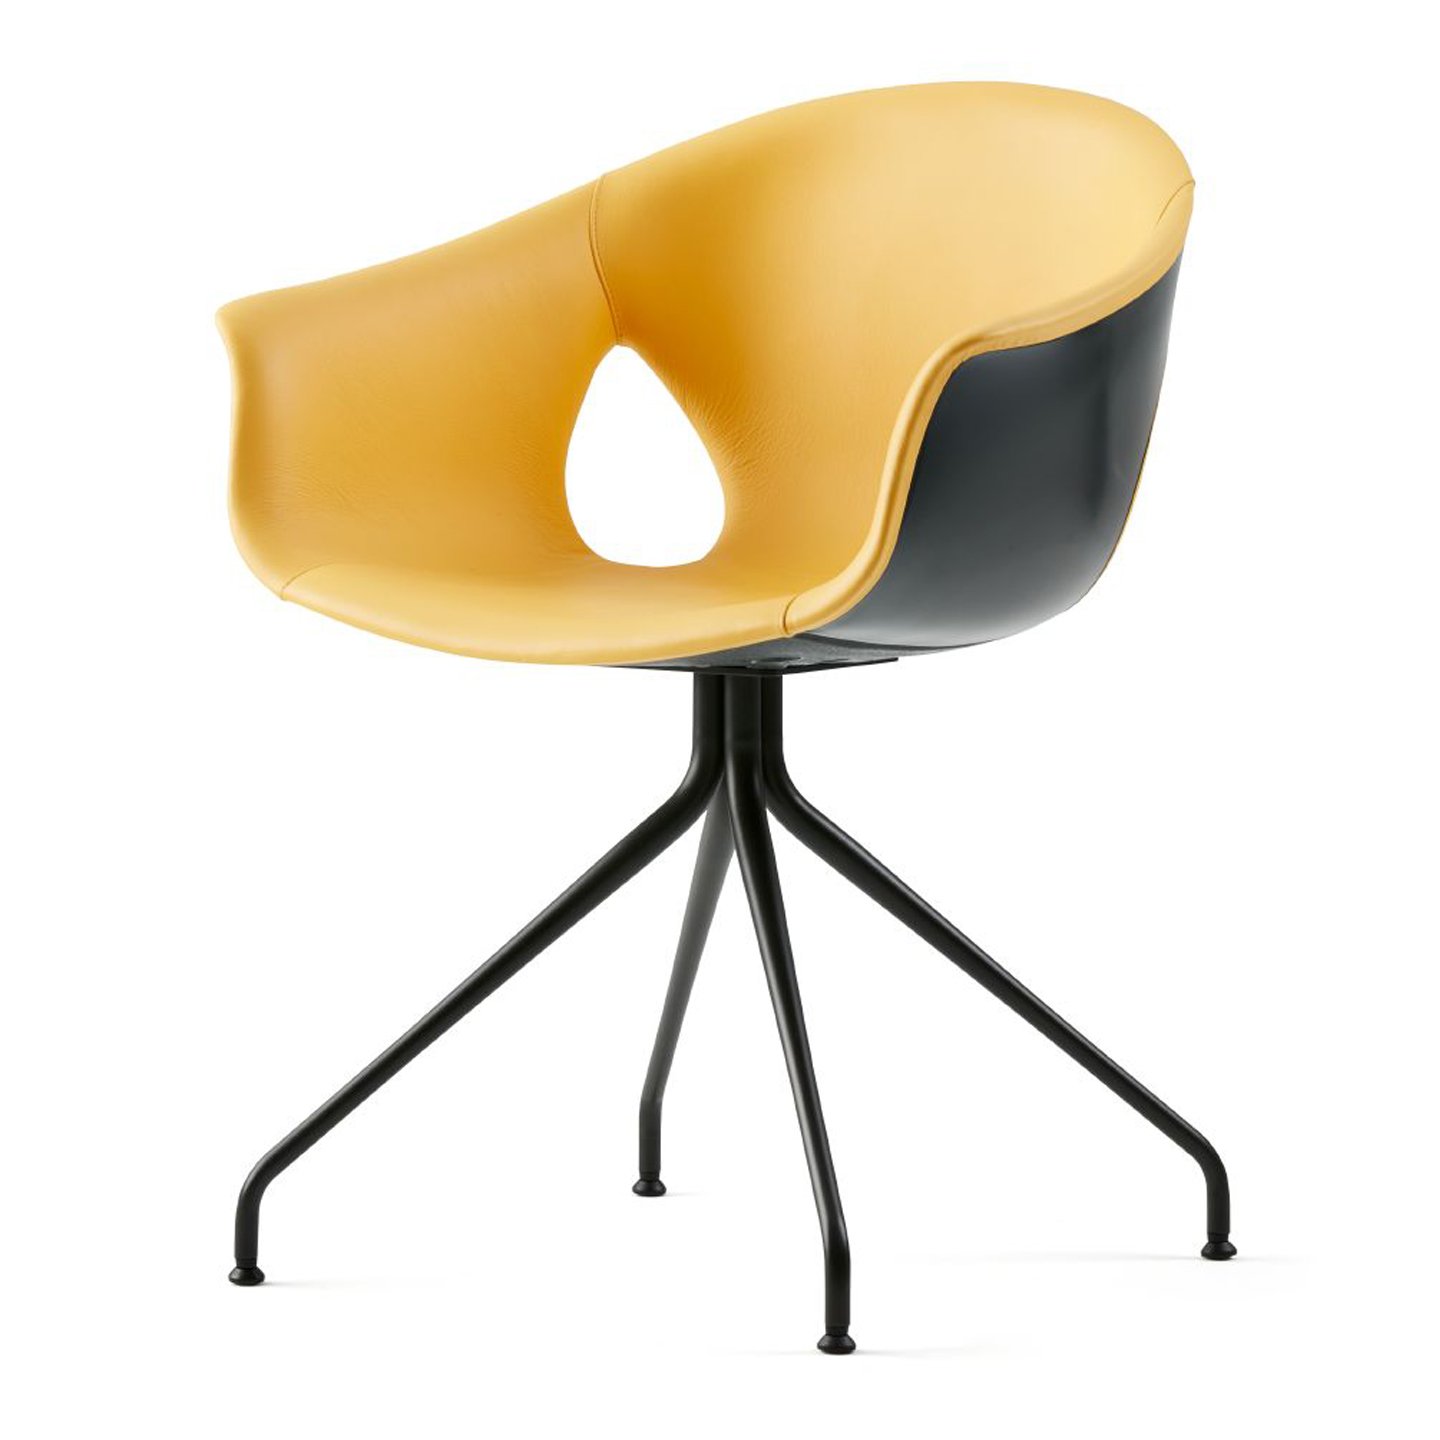 Haworth Ginger Ale chair in mustard leather upholstery and black exterior and metal legs in a side view